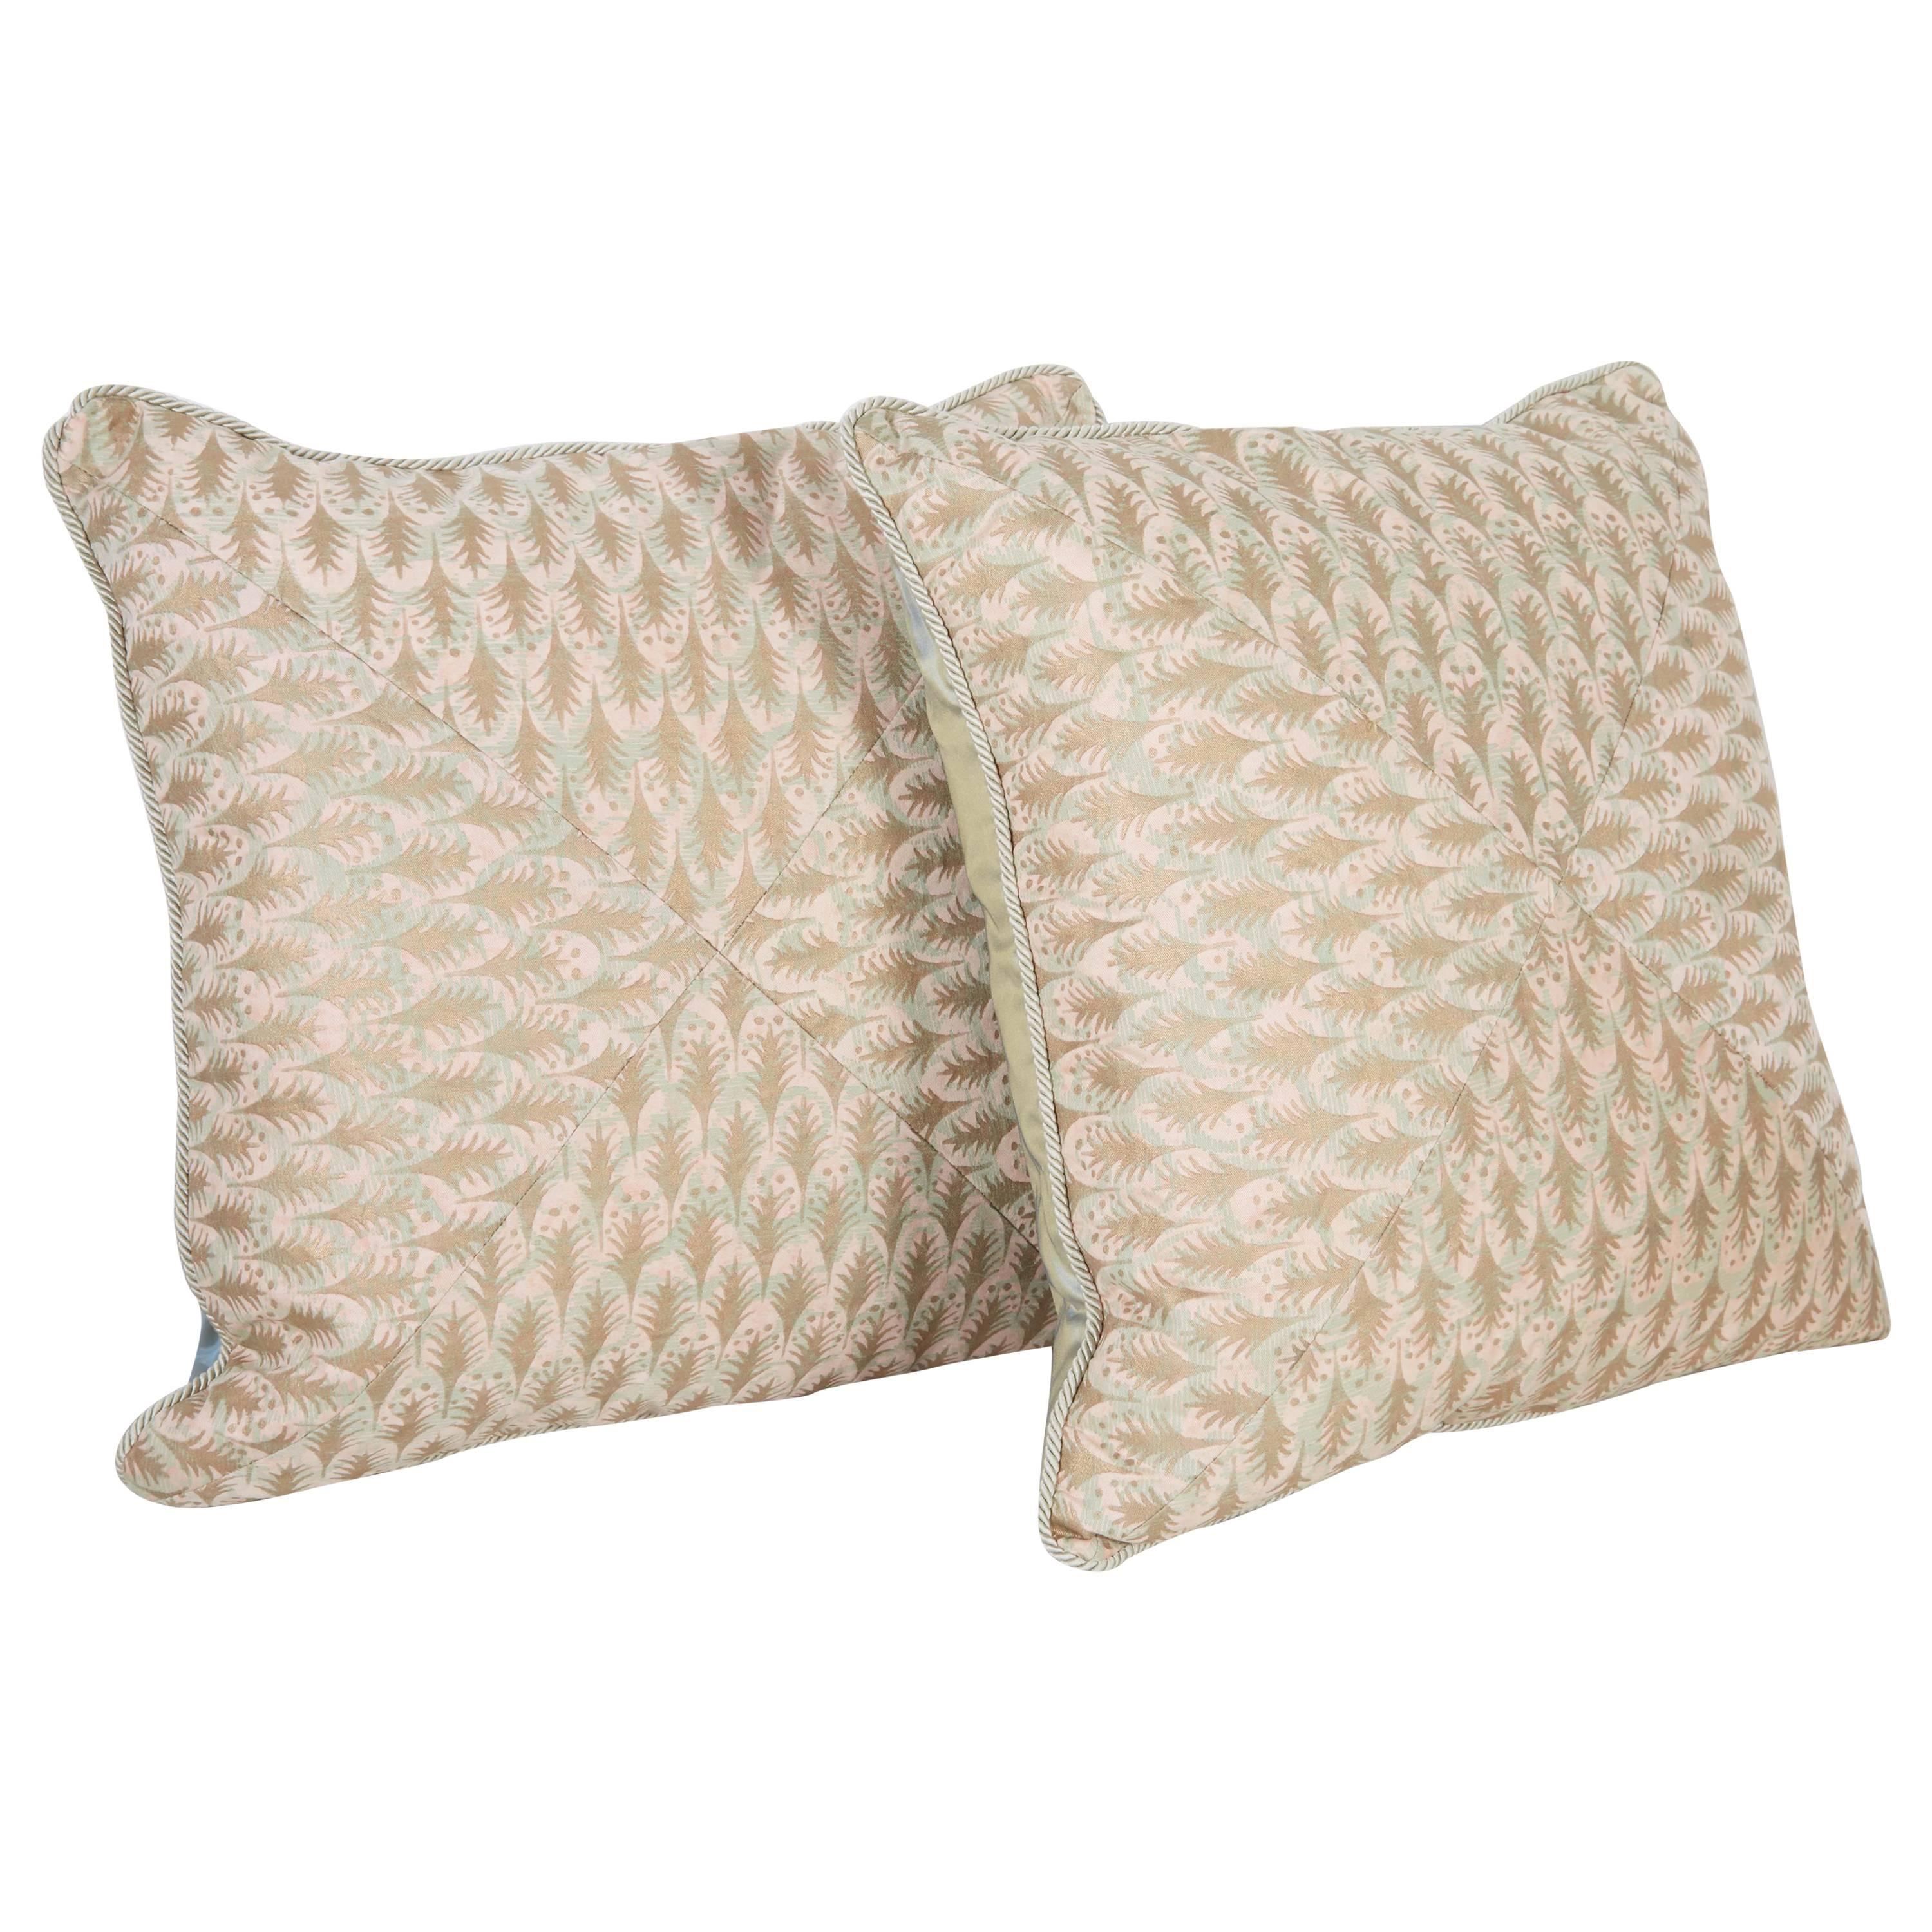 A Pair of Mitered Fortuny Fabric Cushions in the Puimette Pattern